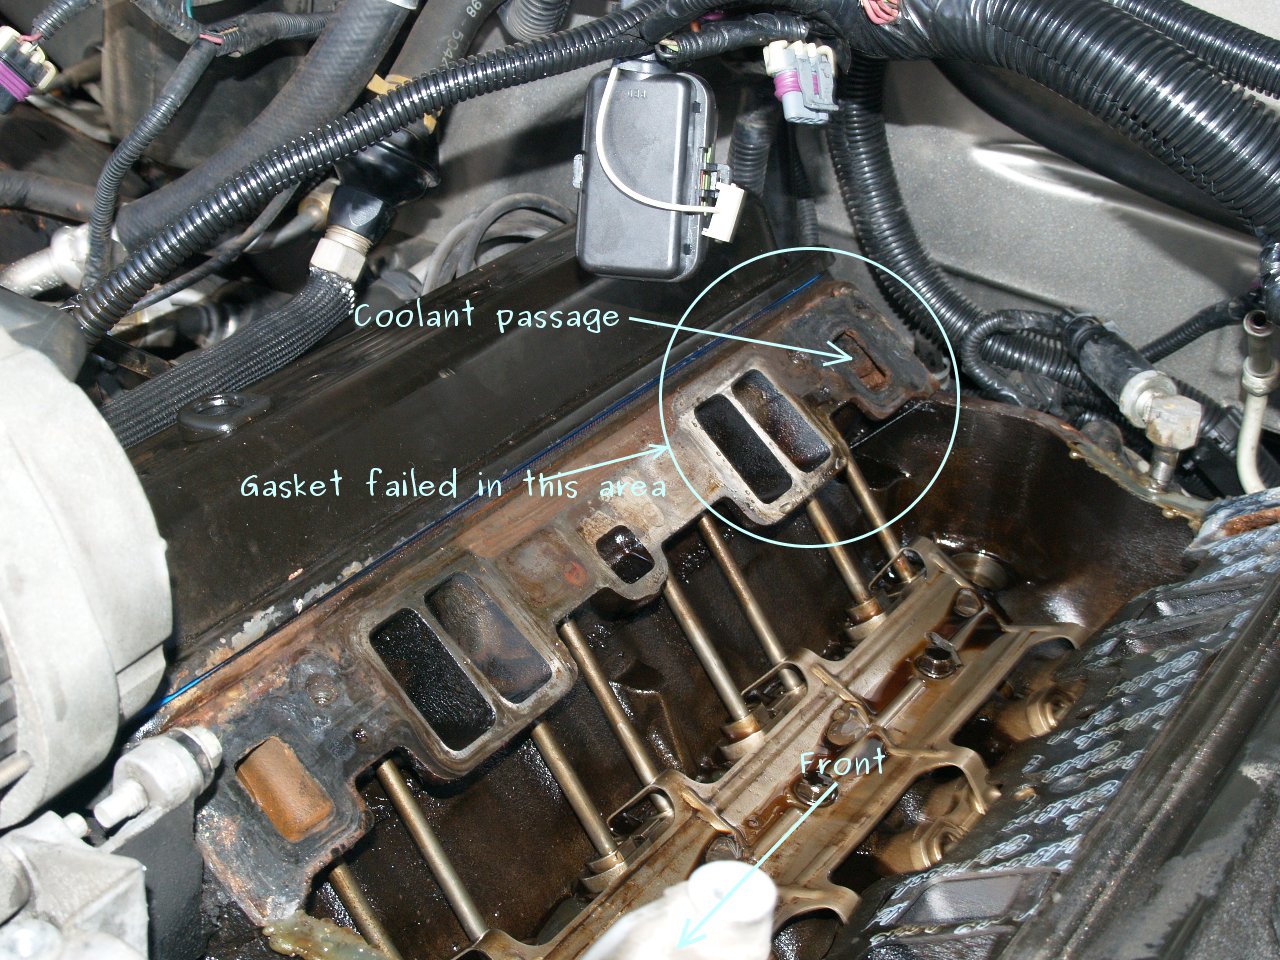 See P064C in engine